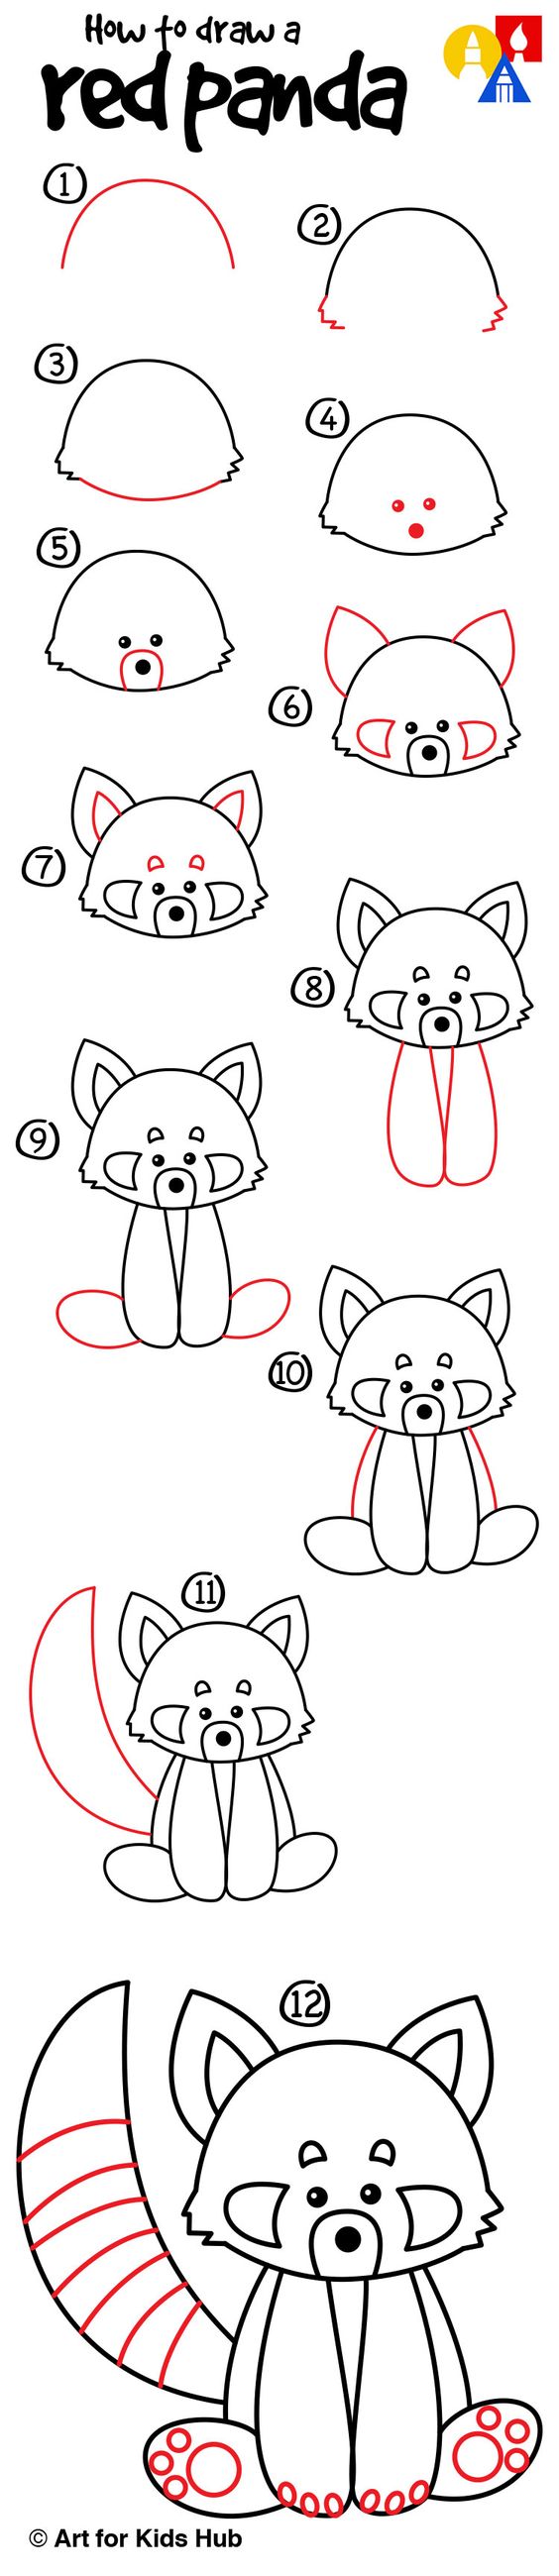 Learn how to draw a red panda!: 